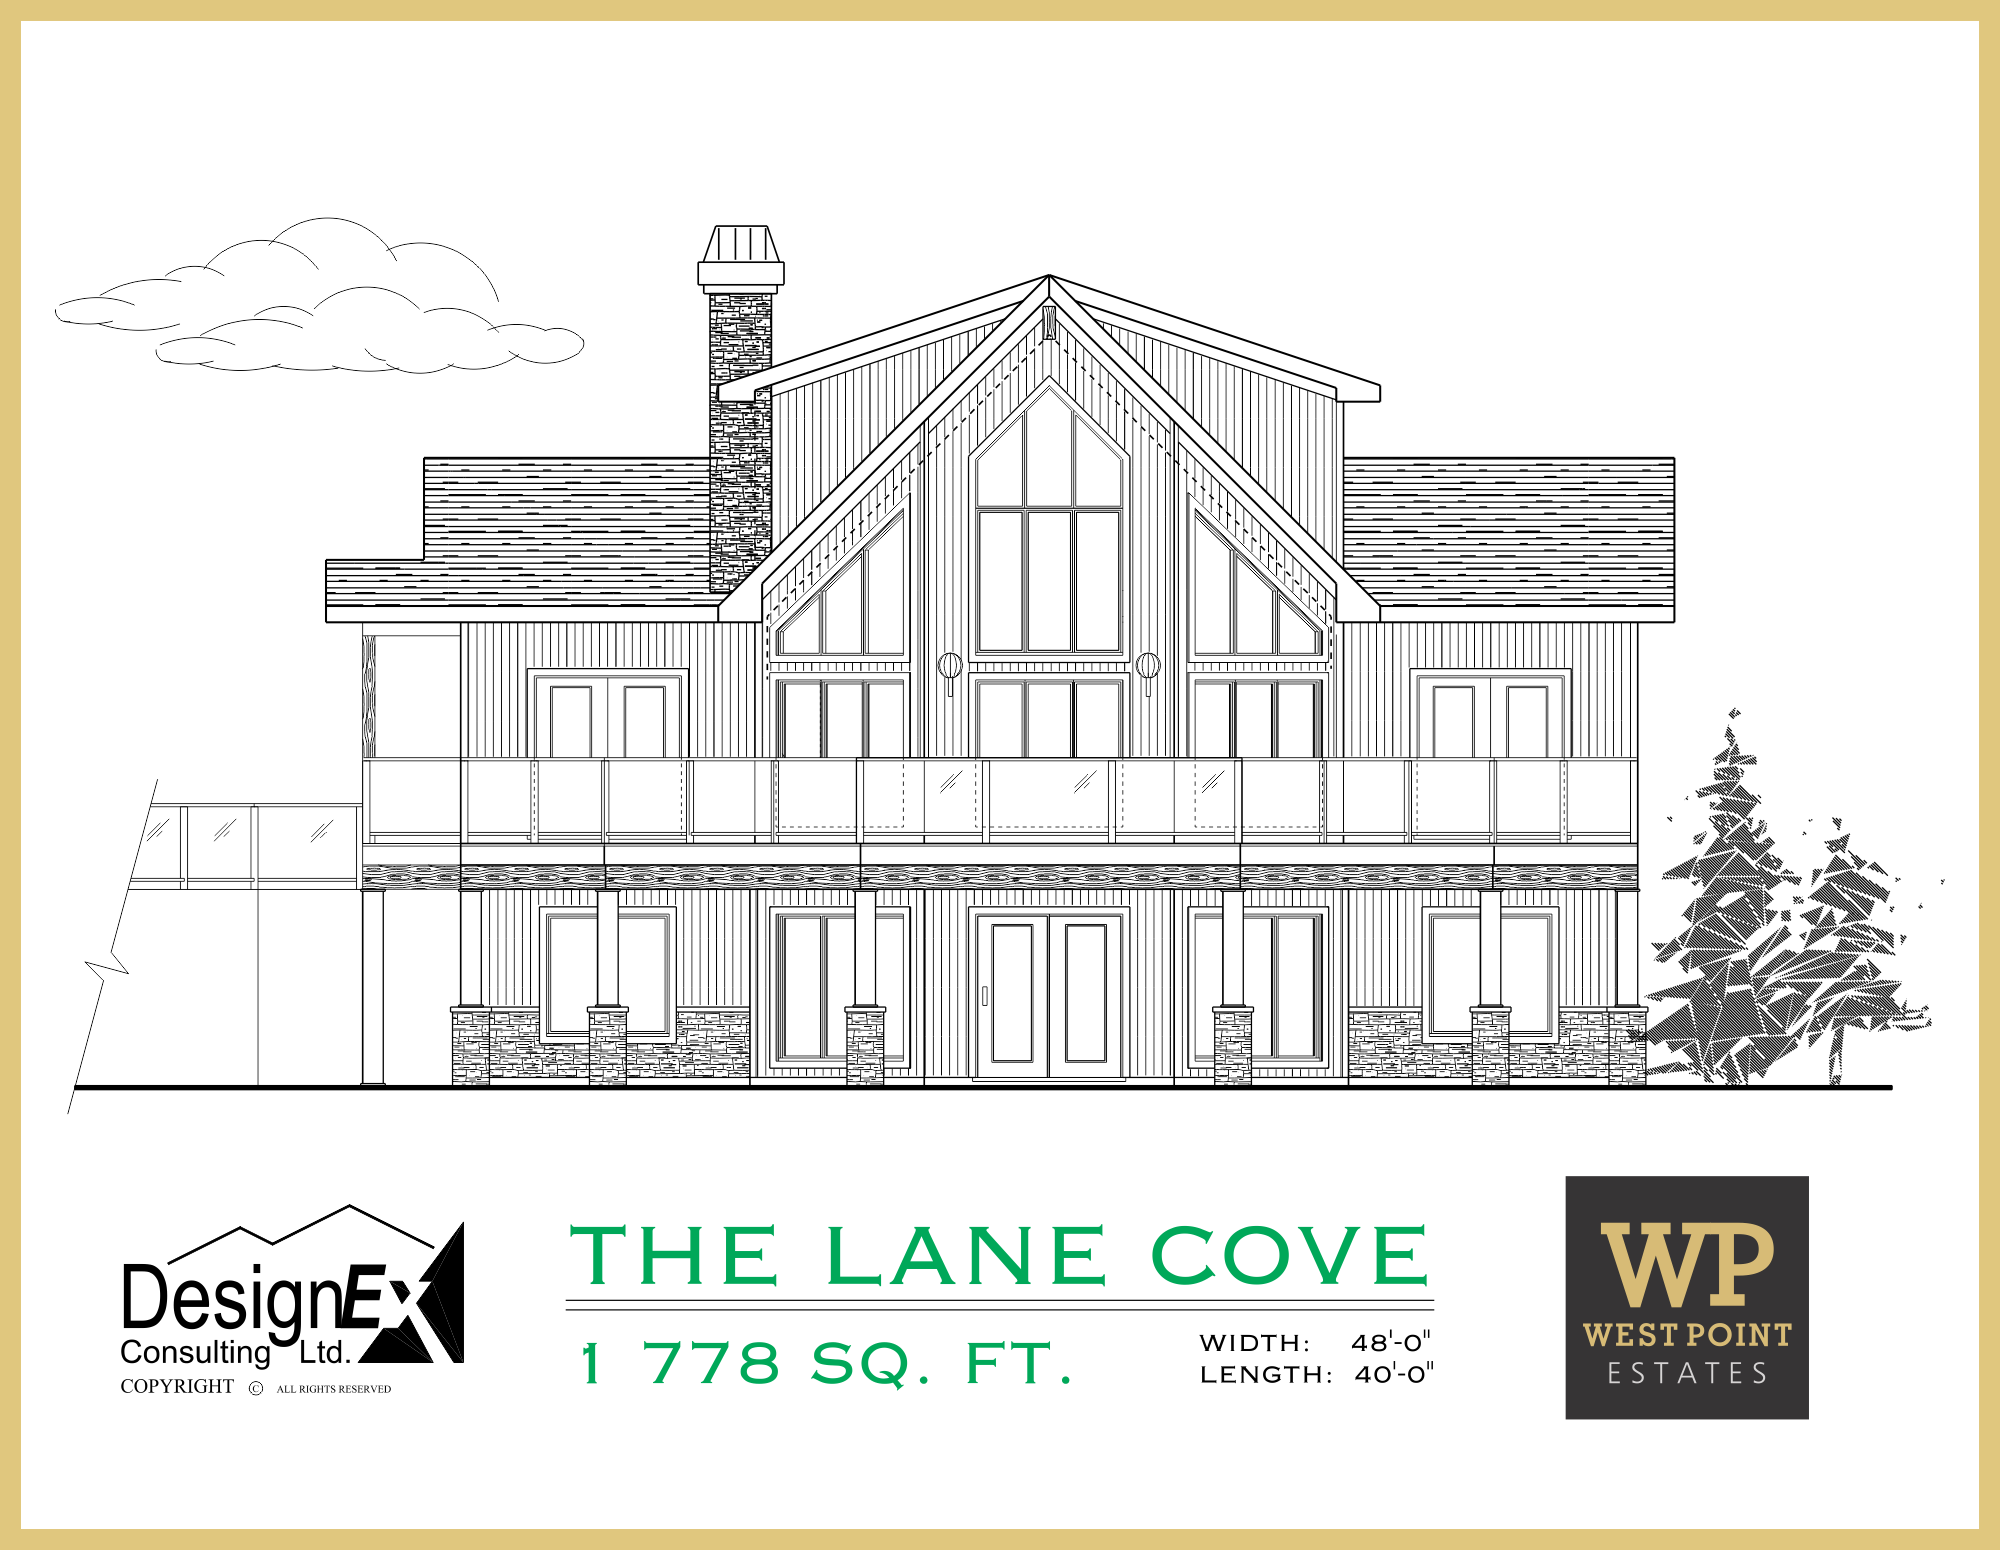 New Haven Homes The Lane Cove Jackfish Lake West Point Estates